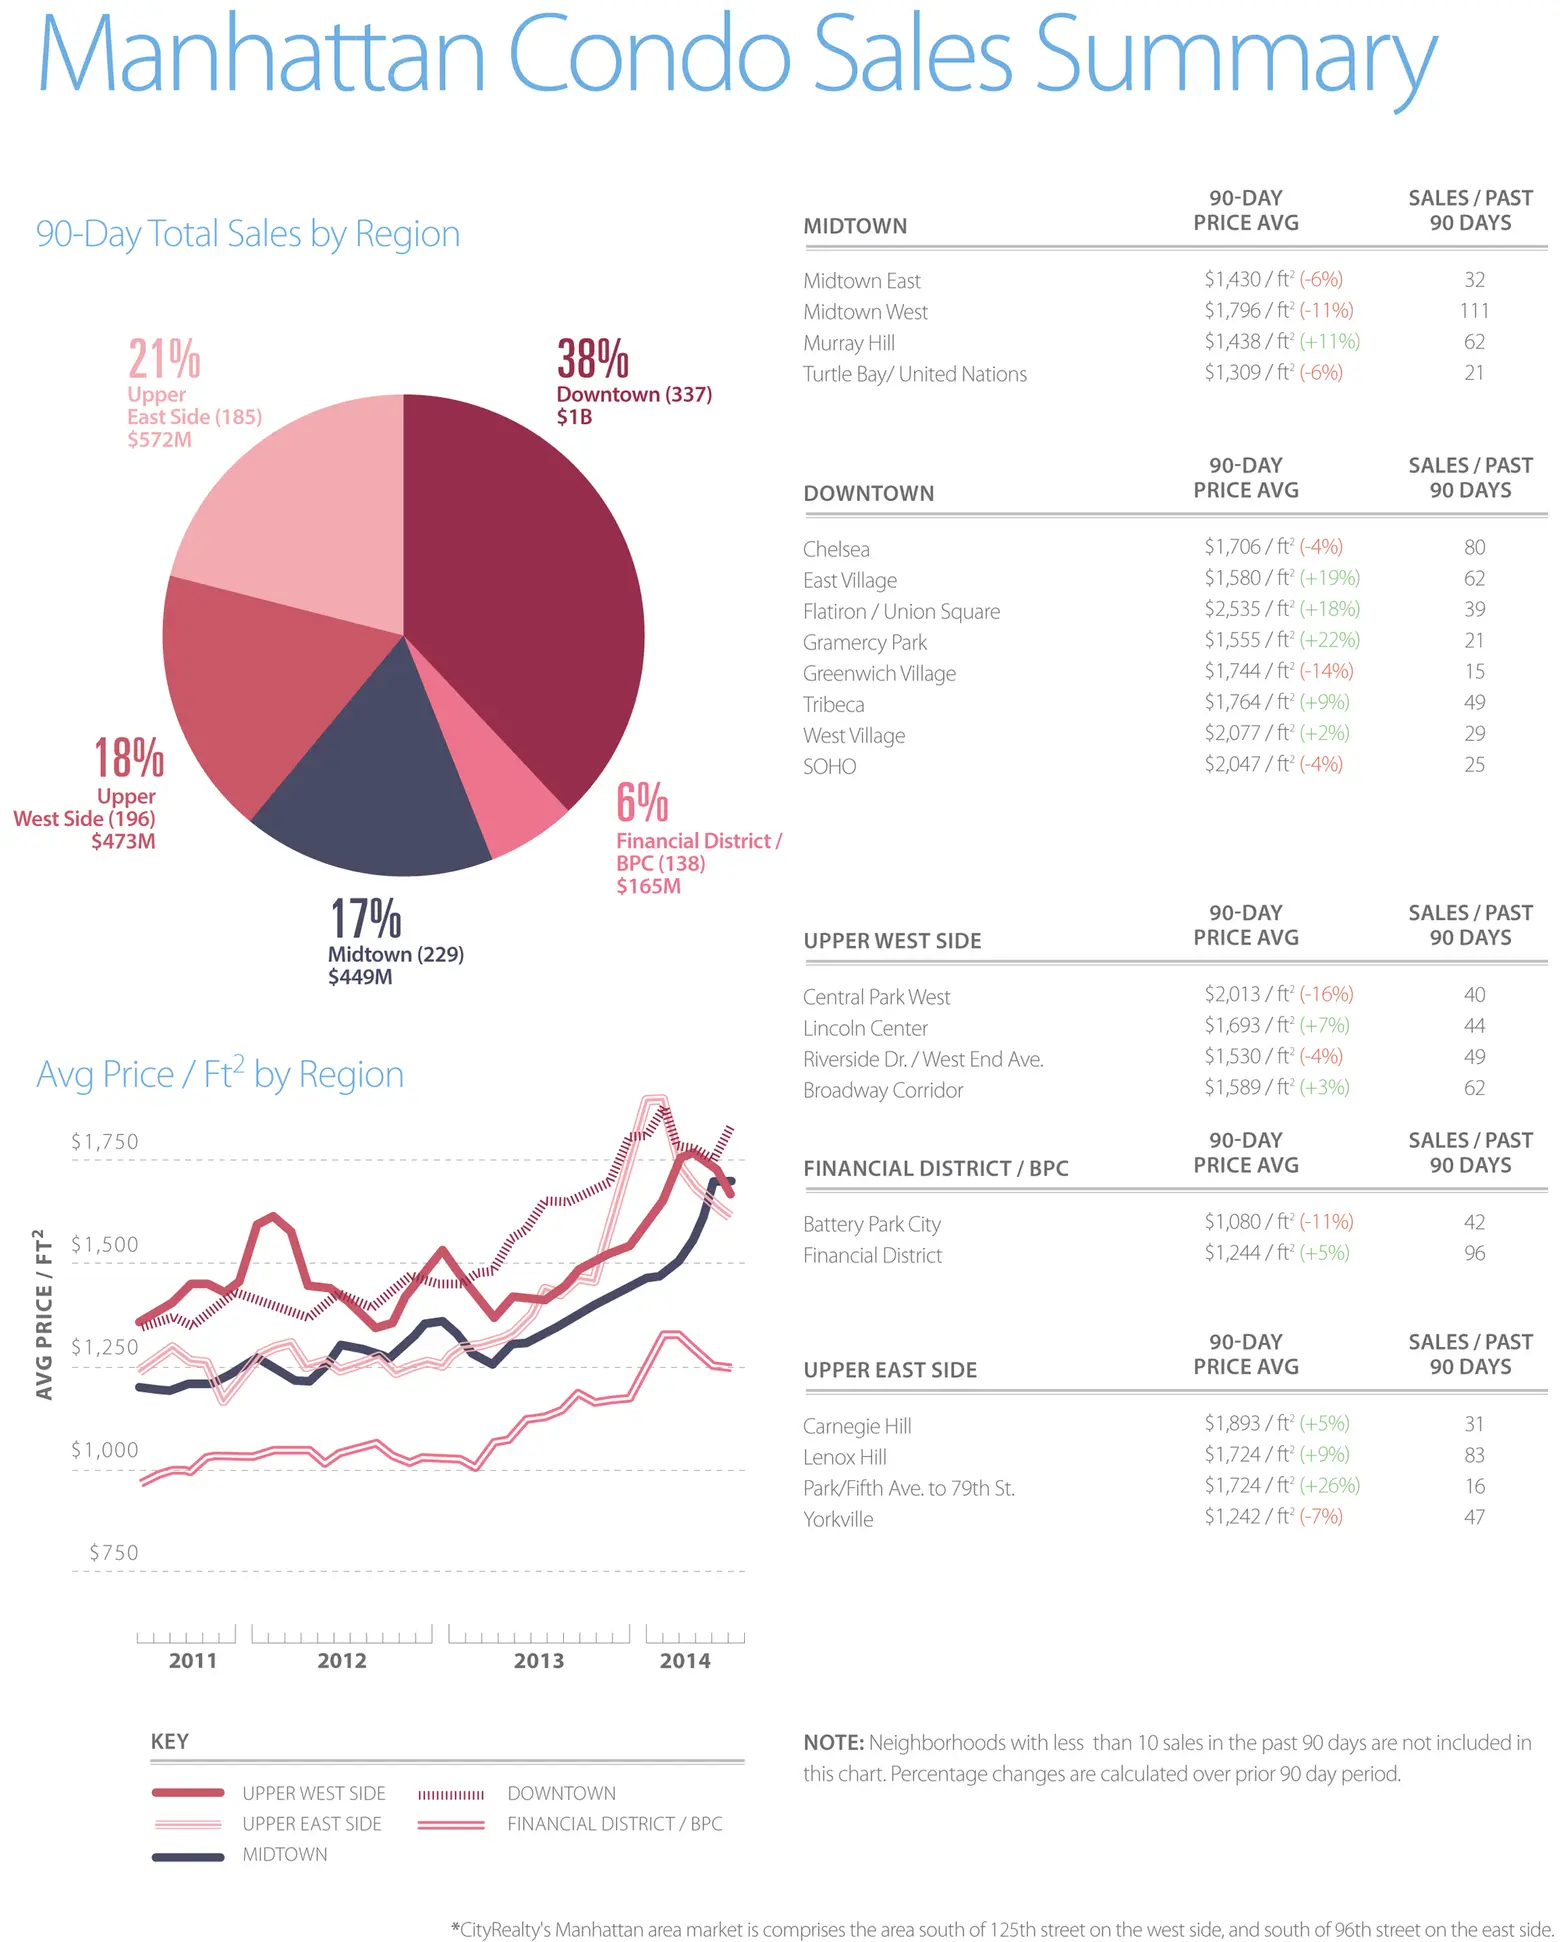 CityRealty Weekly Market august 13 2014, cityrealty market insight